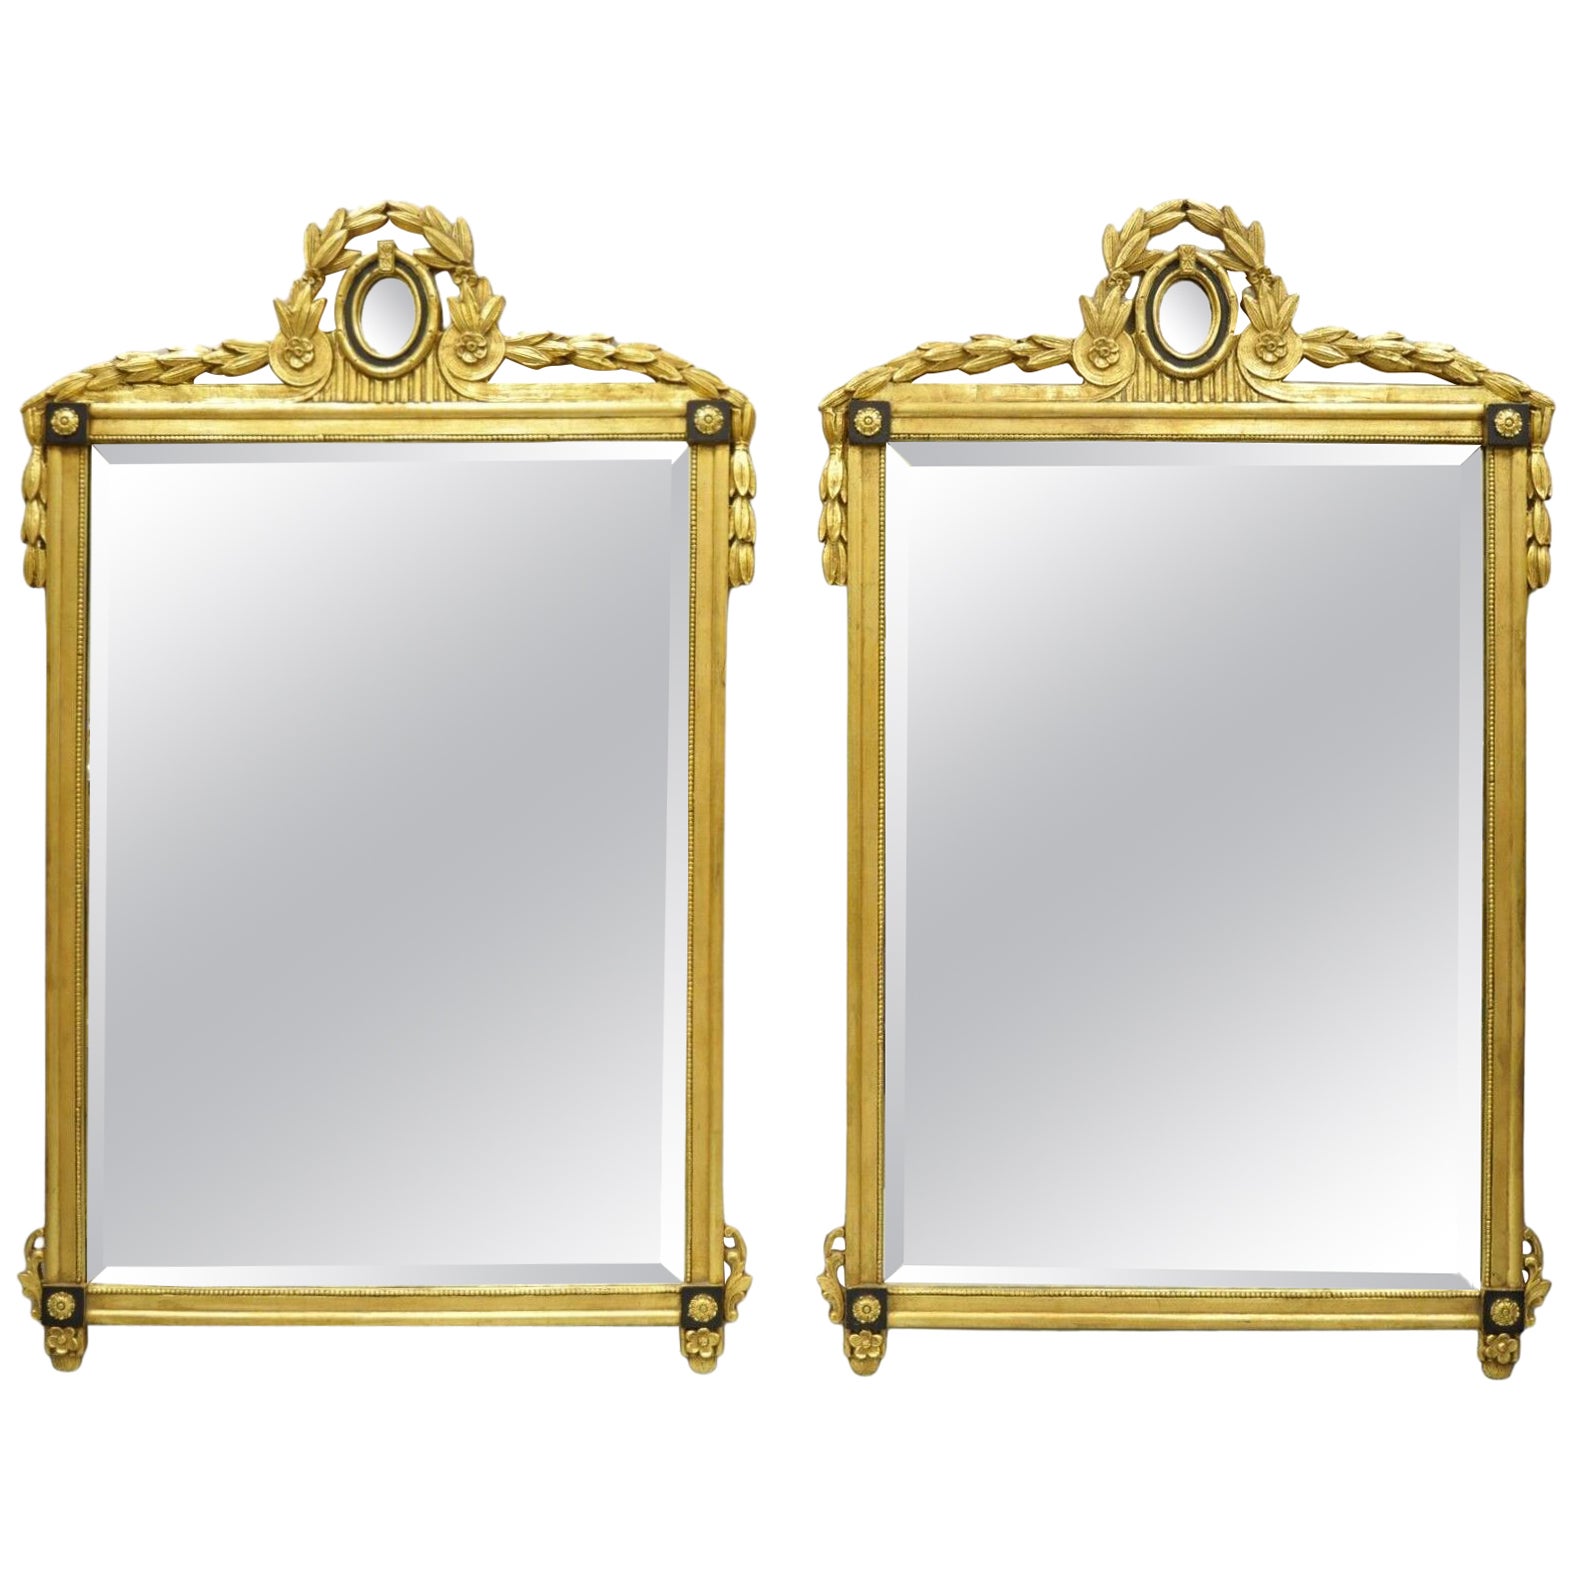 Friedman Brothers French Neoclassical Carved Wood Large Wall Mirrors - a Pair For Sale